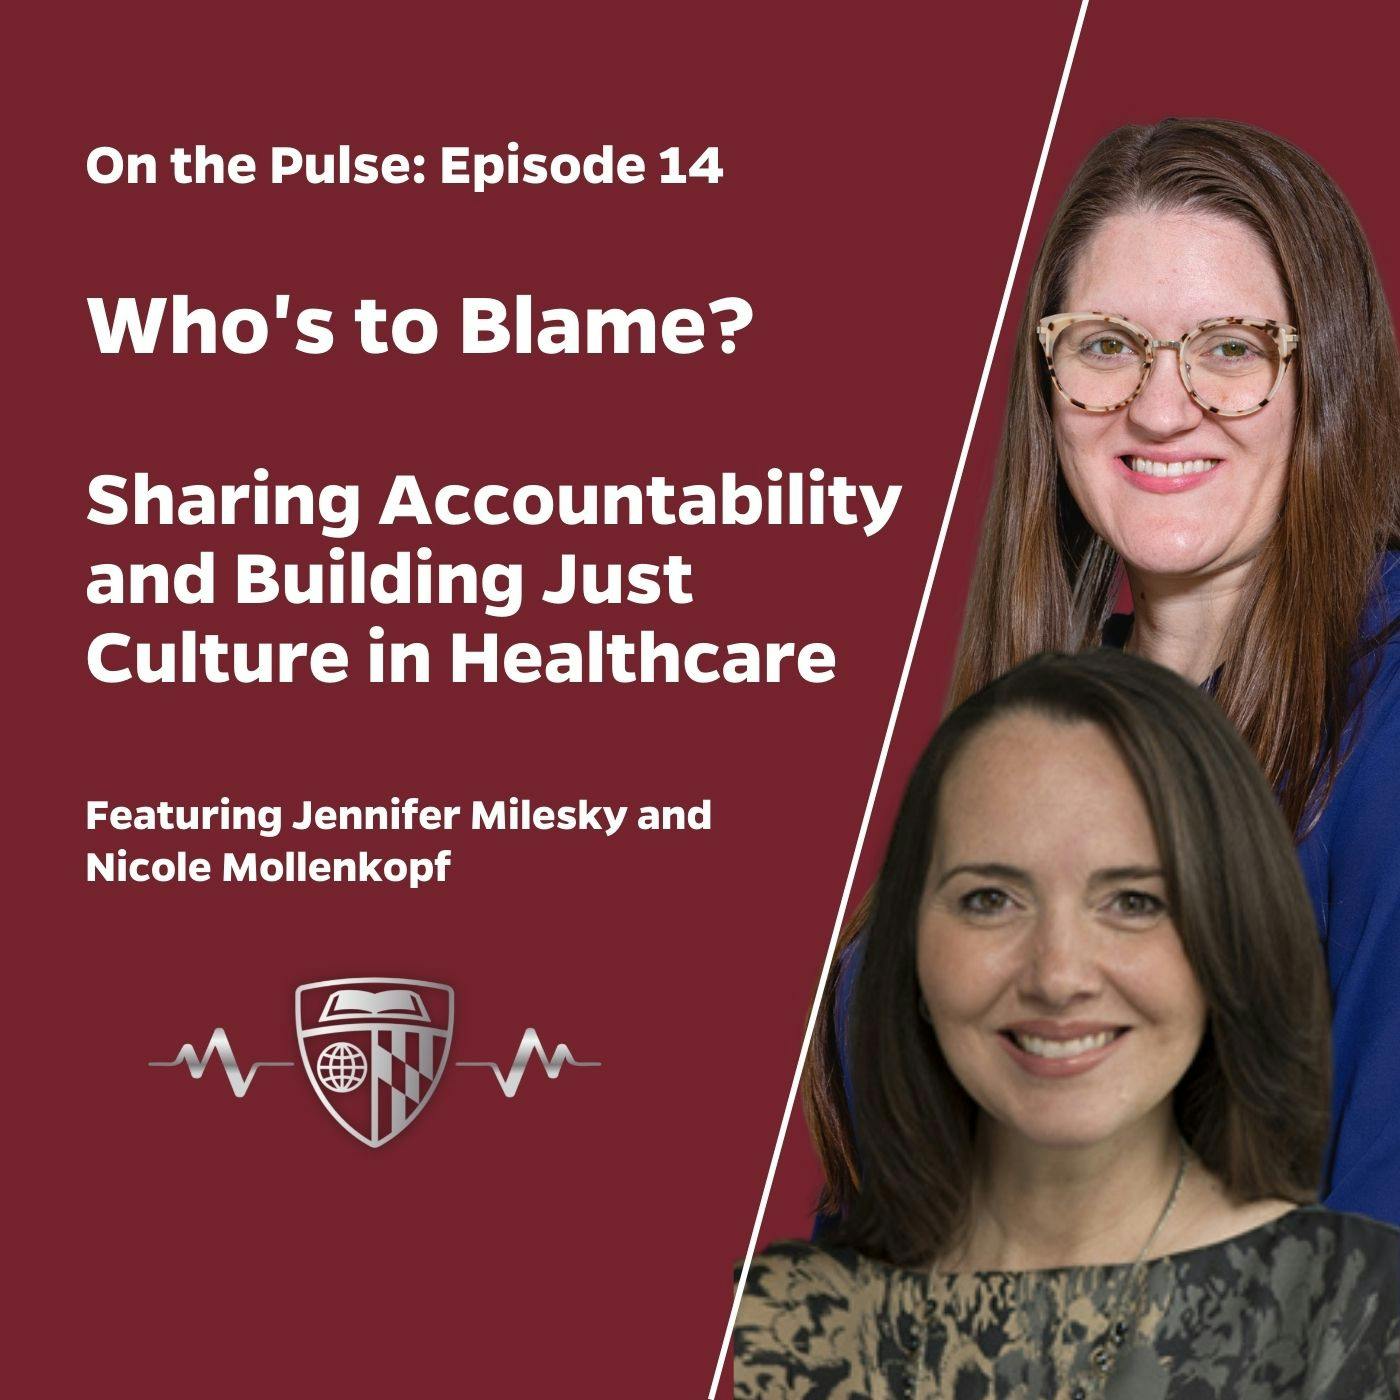 On the Pulse: Who's to Blame? Building just culture within health care